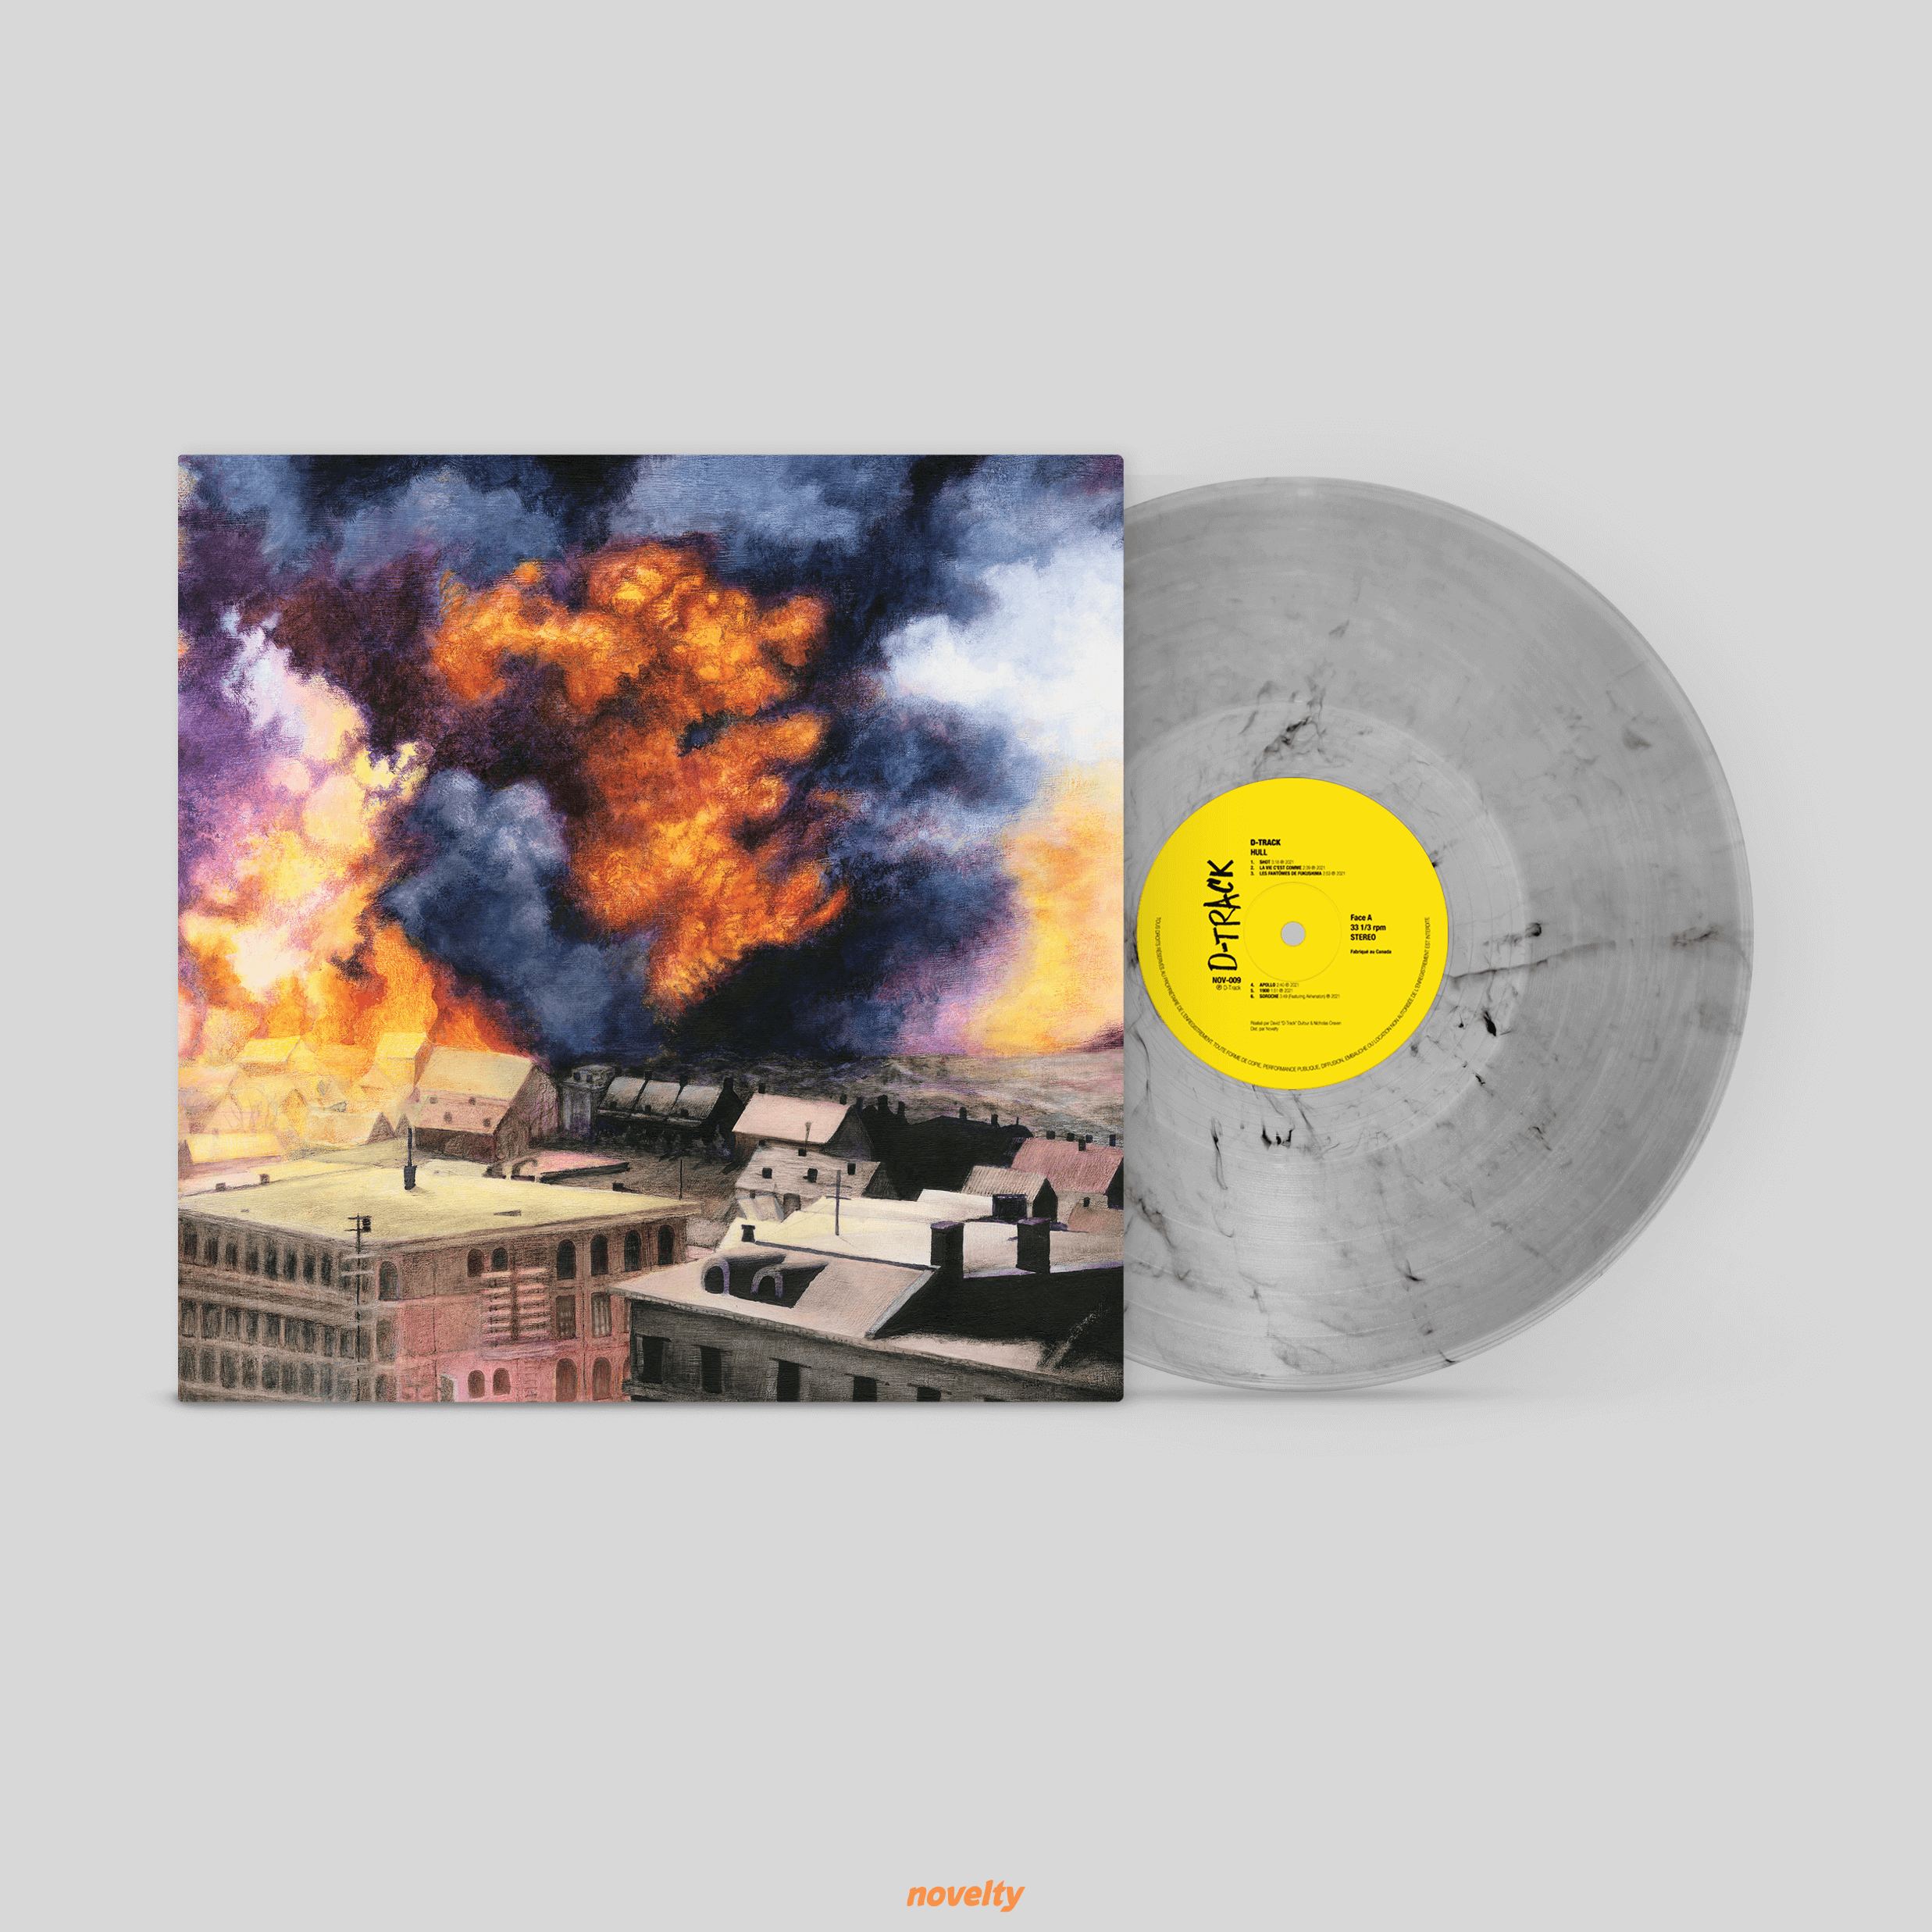 D-TRACK'S ALBUM HULL IS NOW AVAILABLE ON VINYL